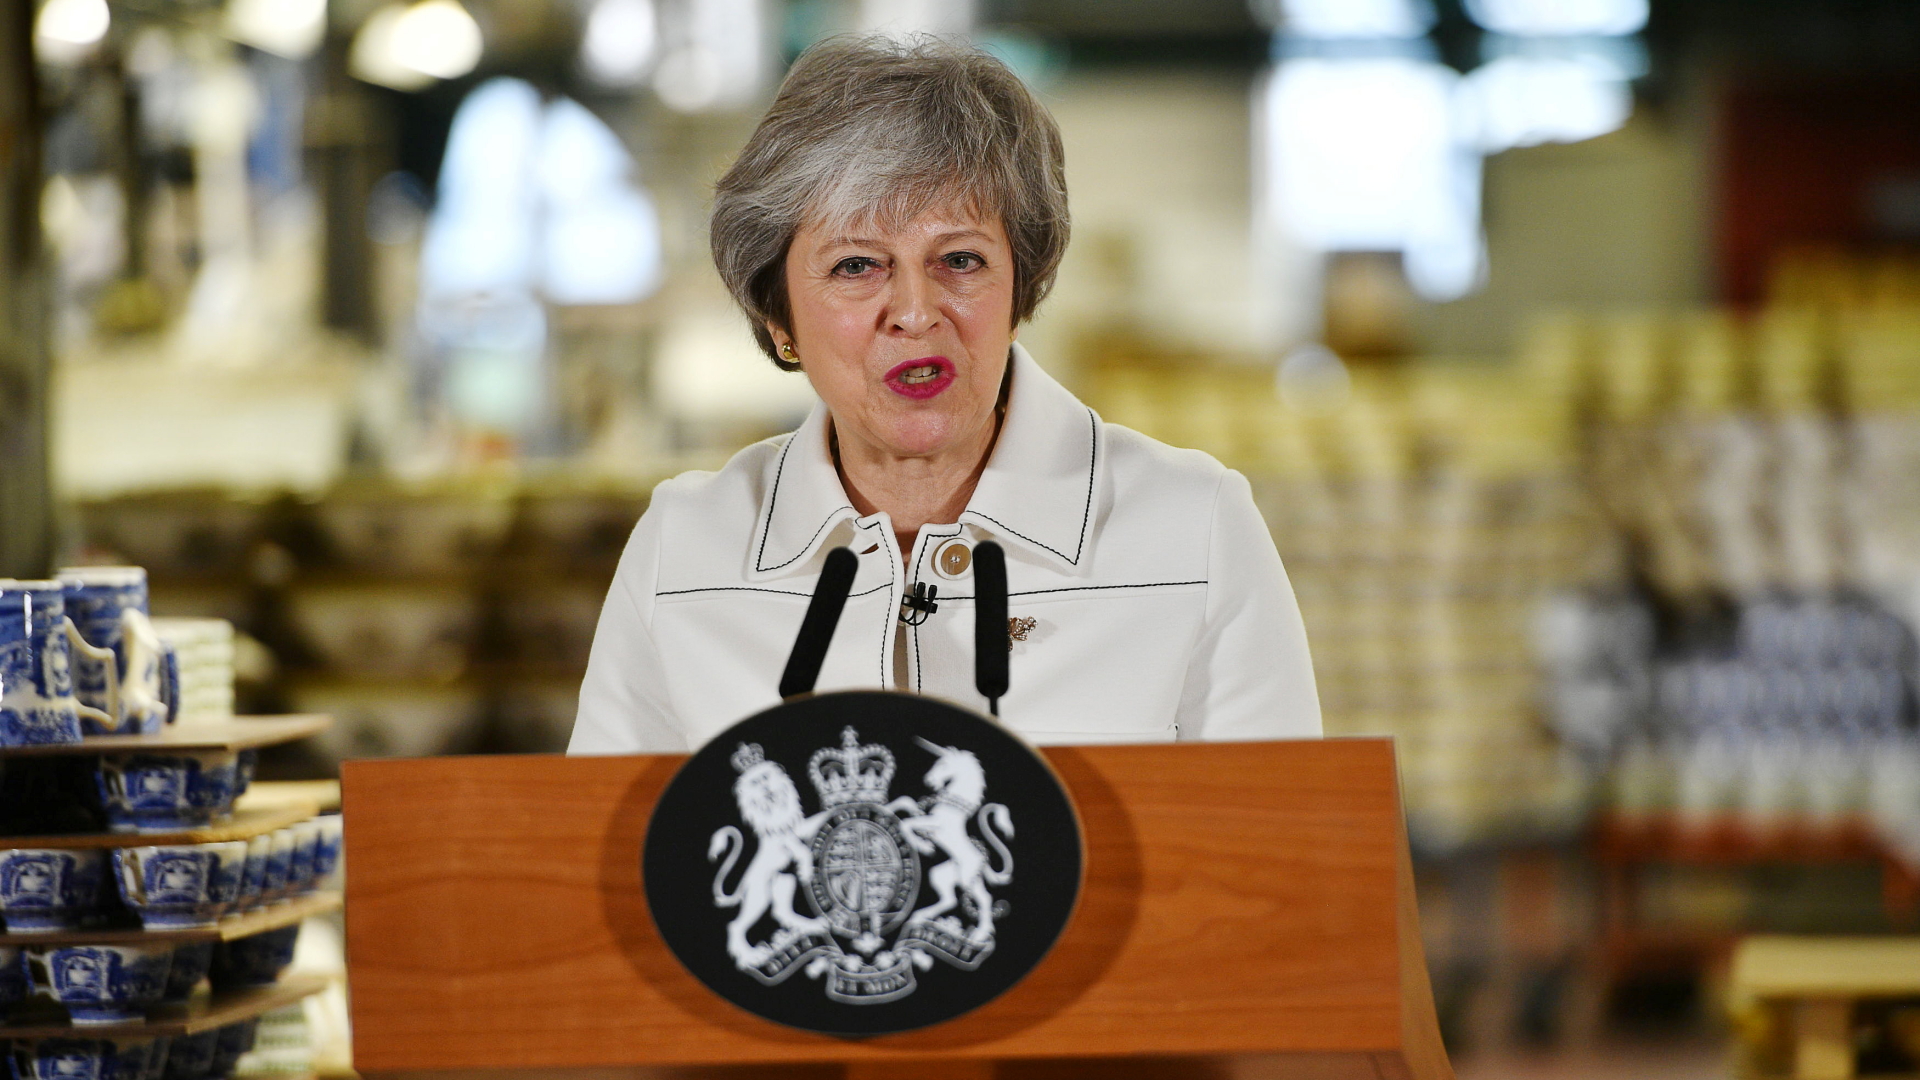 May bei einer Rede in Stoke-on-Trent | REUTERS